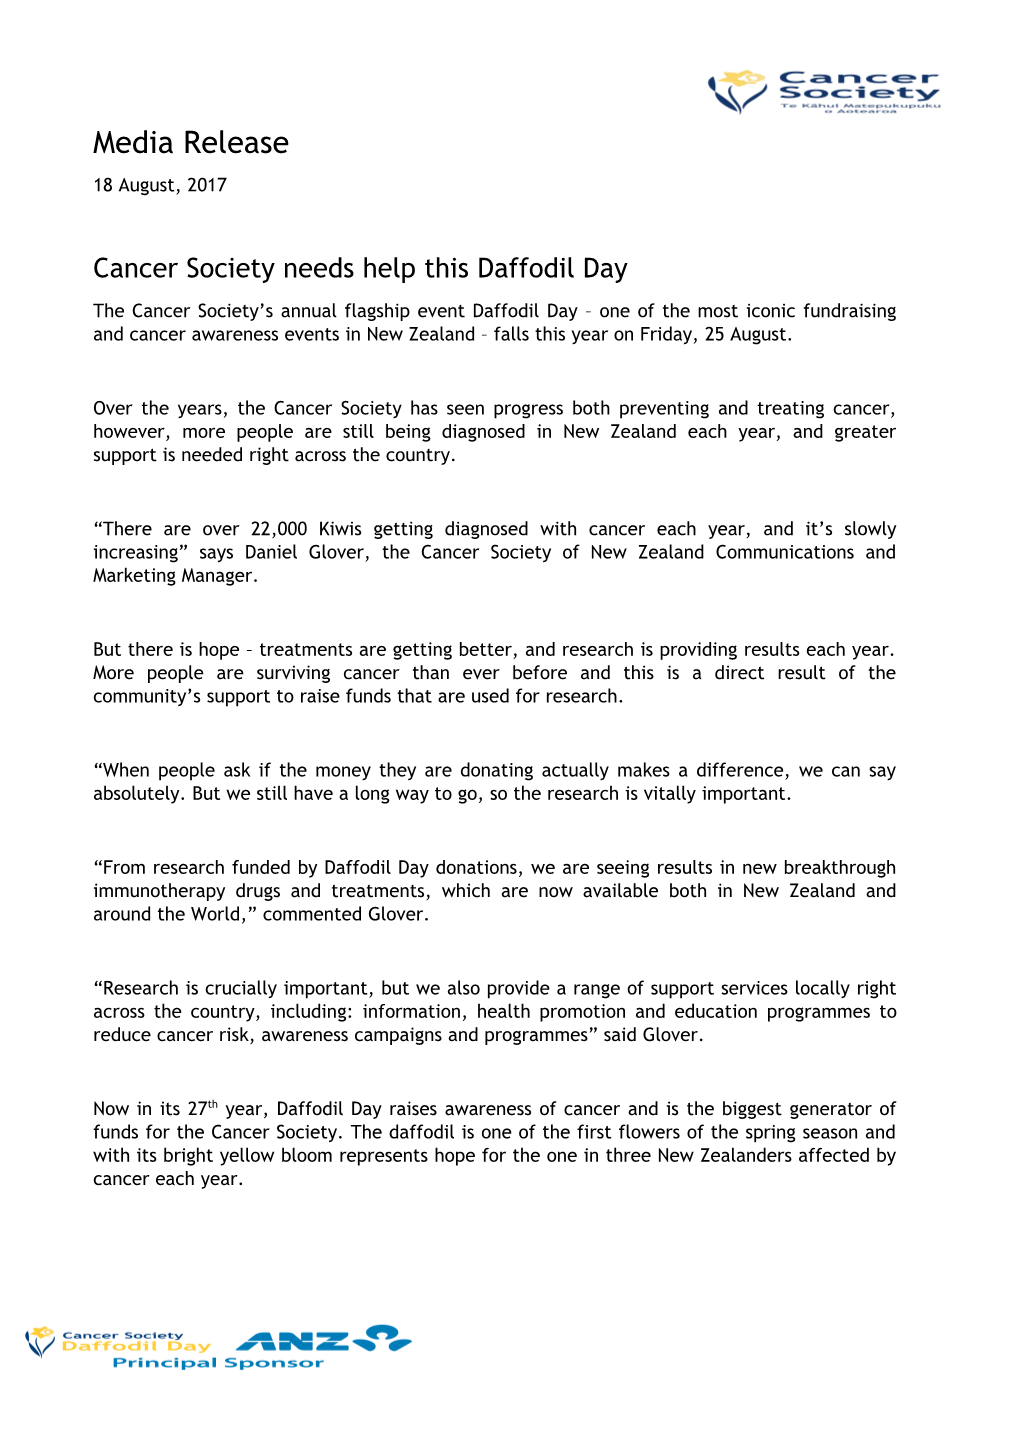 Cancer Society Needs Help This Daffodil Day